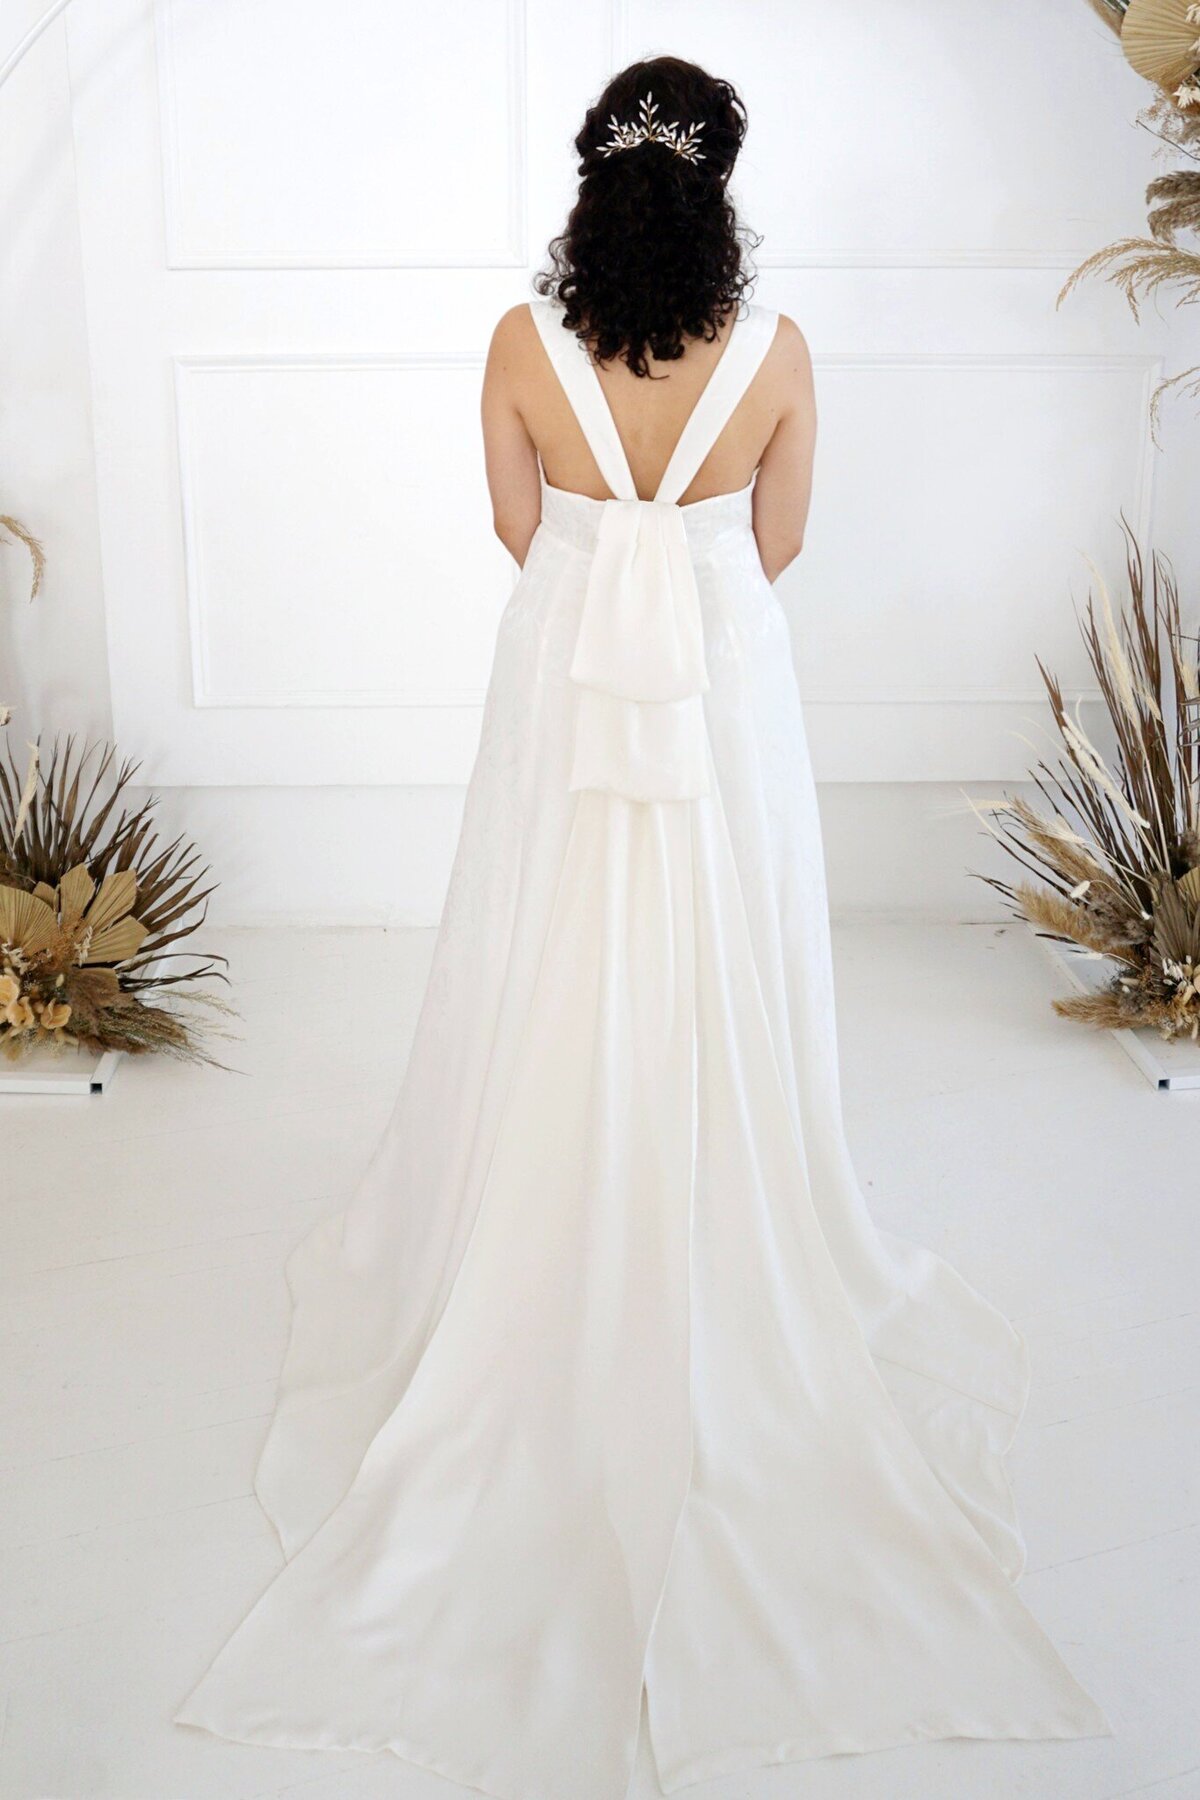 The back of the Sol modified a-line wedding dress features a detachable oversized bow that sits under the v-back.